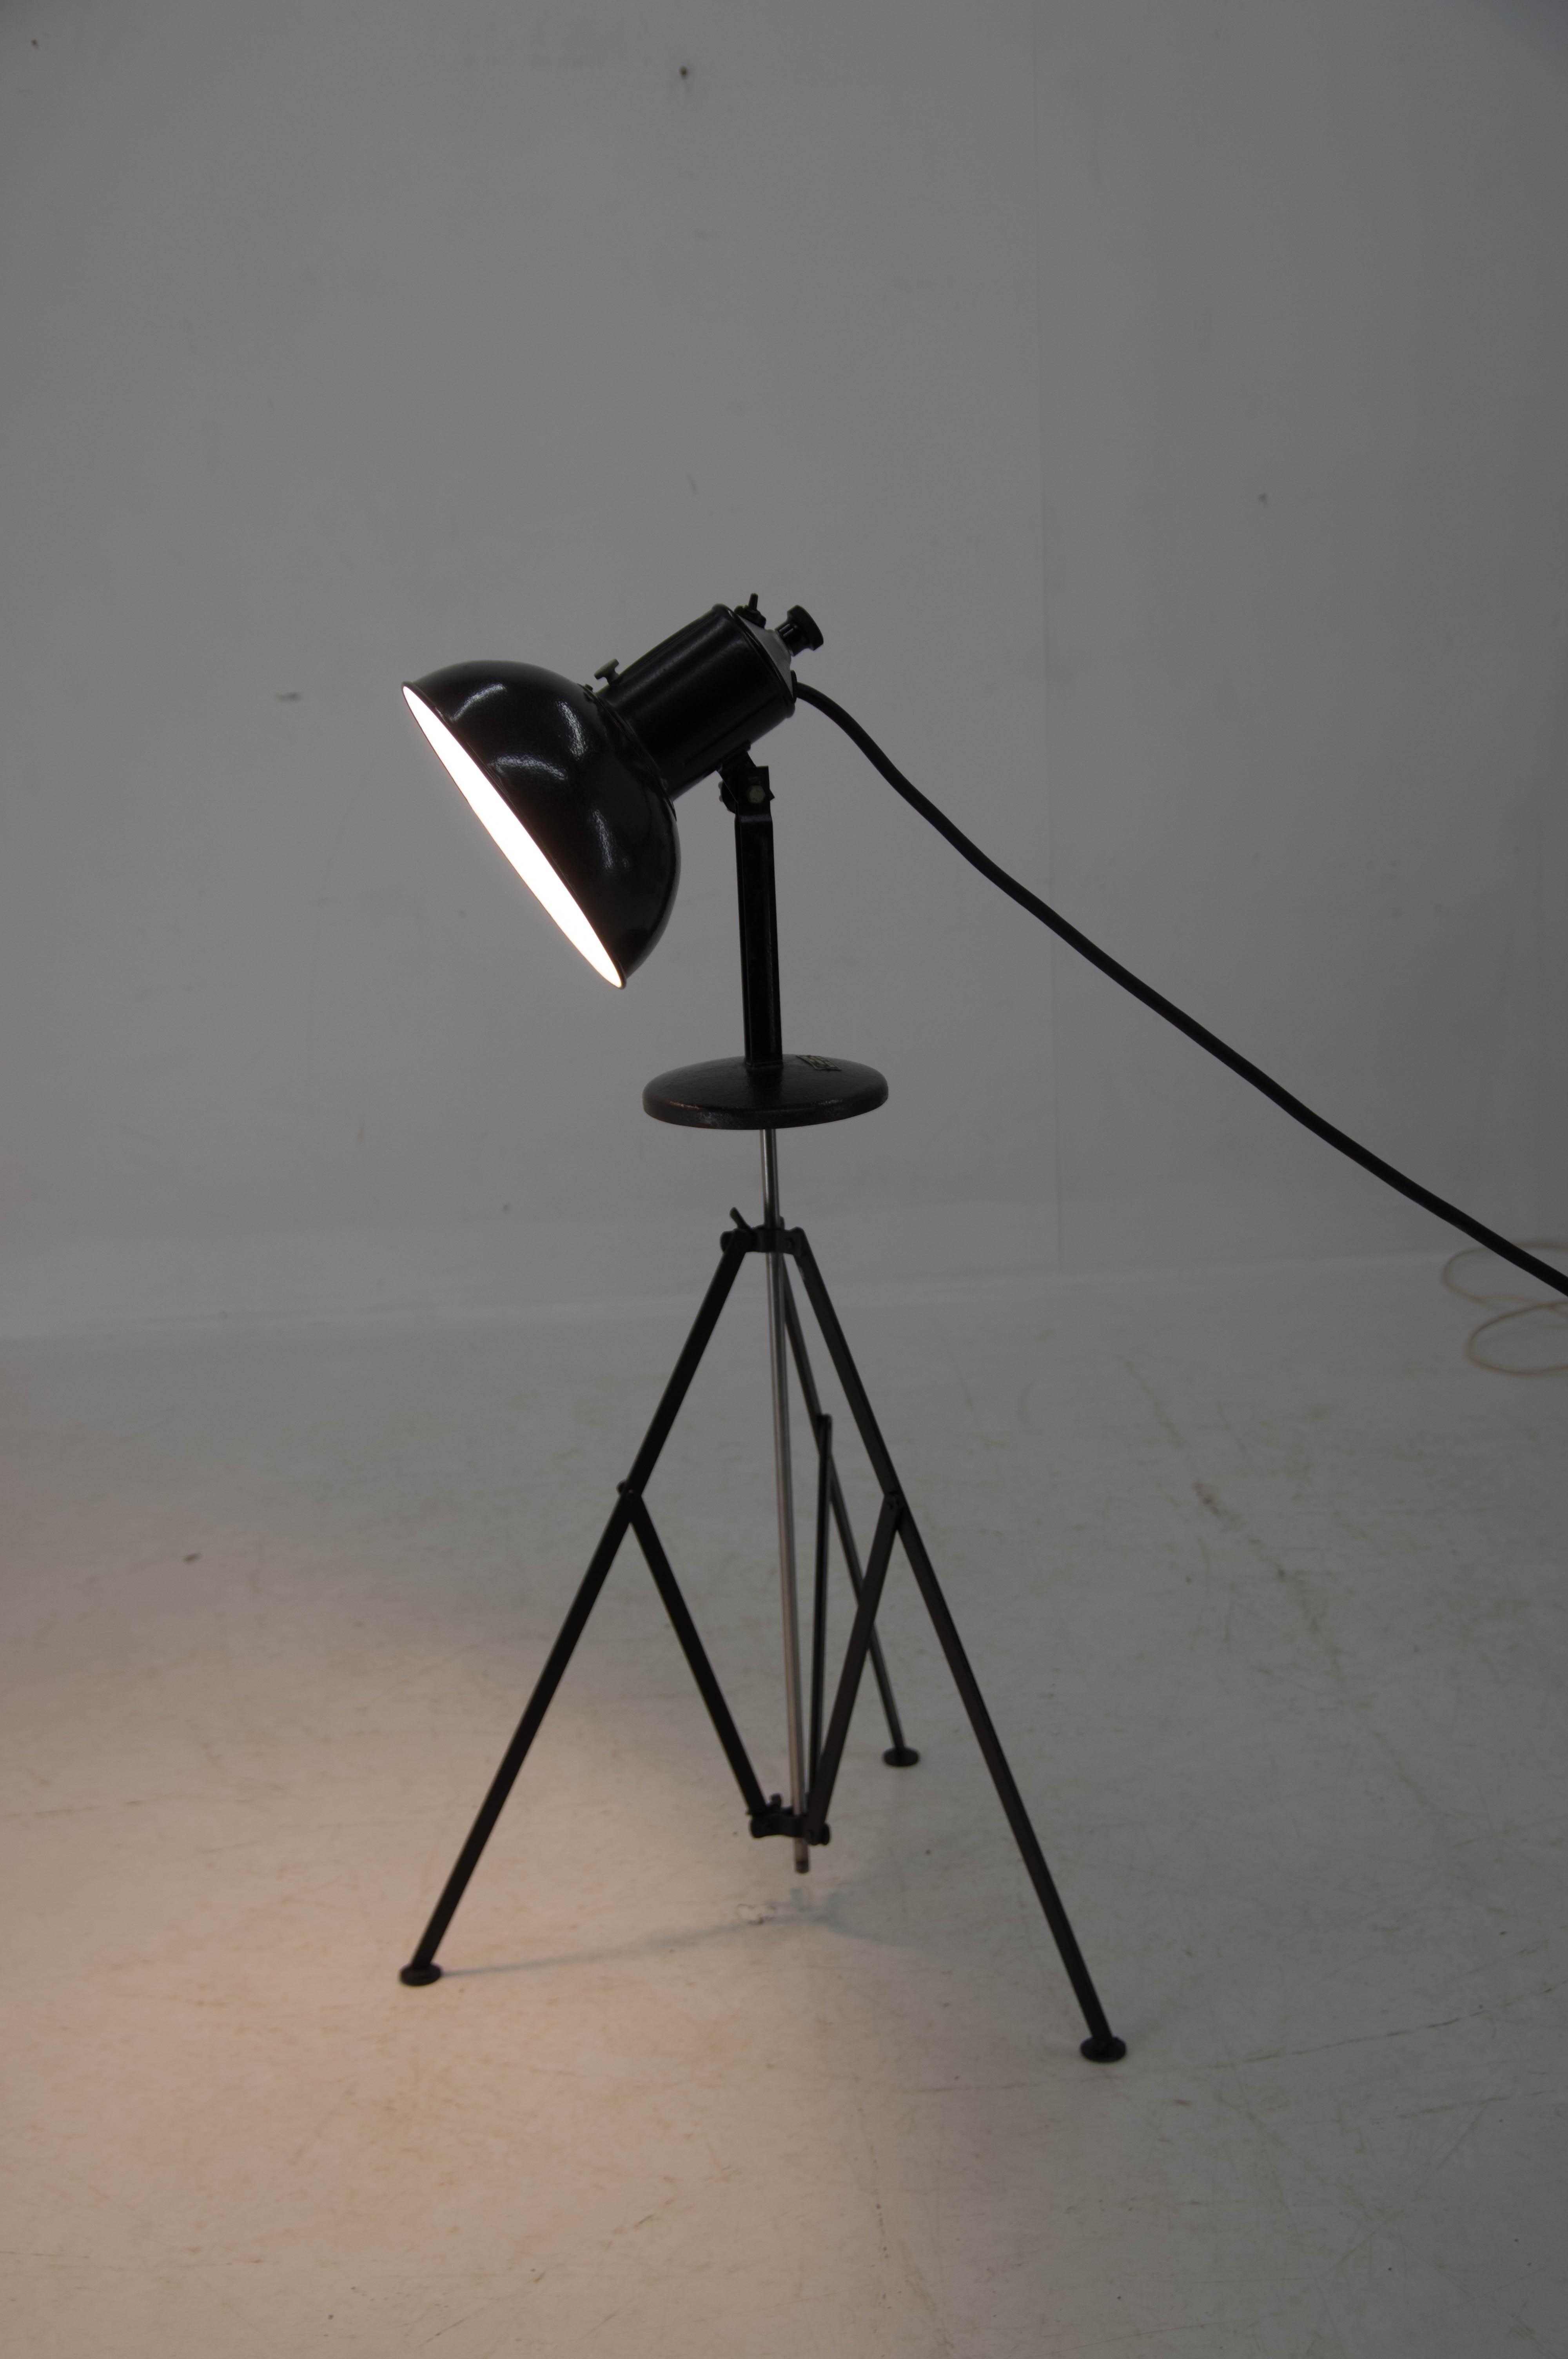 Metal industrial floor lamp with flexible shade.
Very good original condition.
max 200W, E25-E27 bulb
US plug adapter included